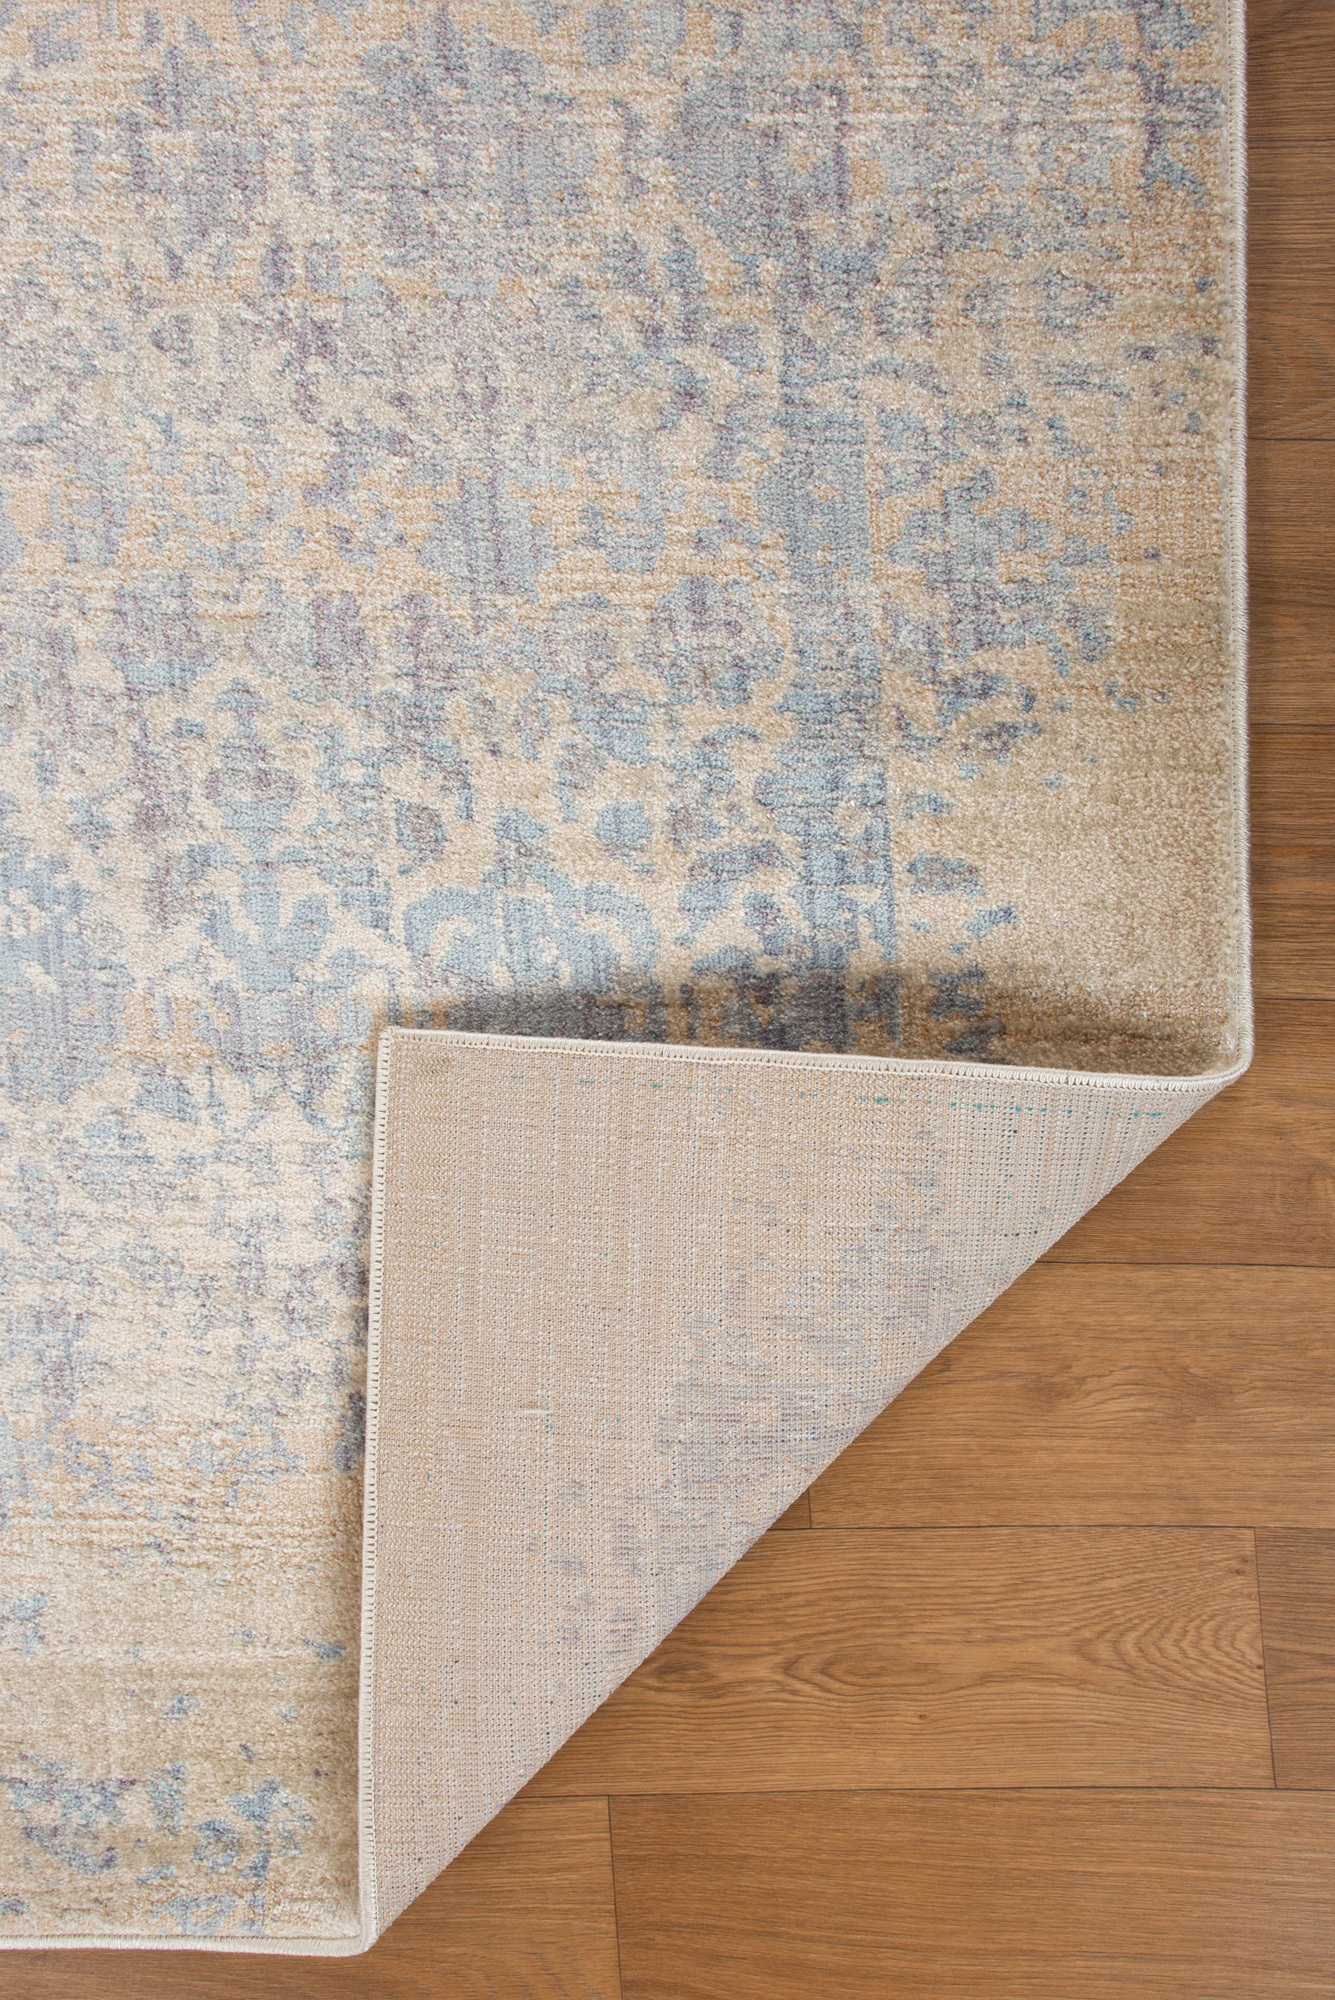 Ares Transitional Floral Rug